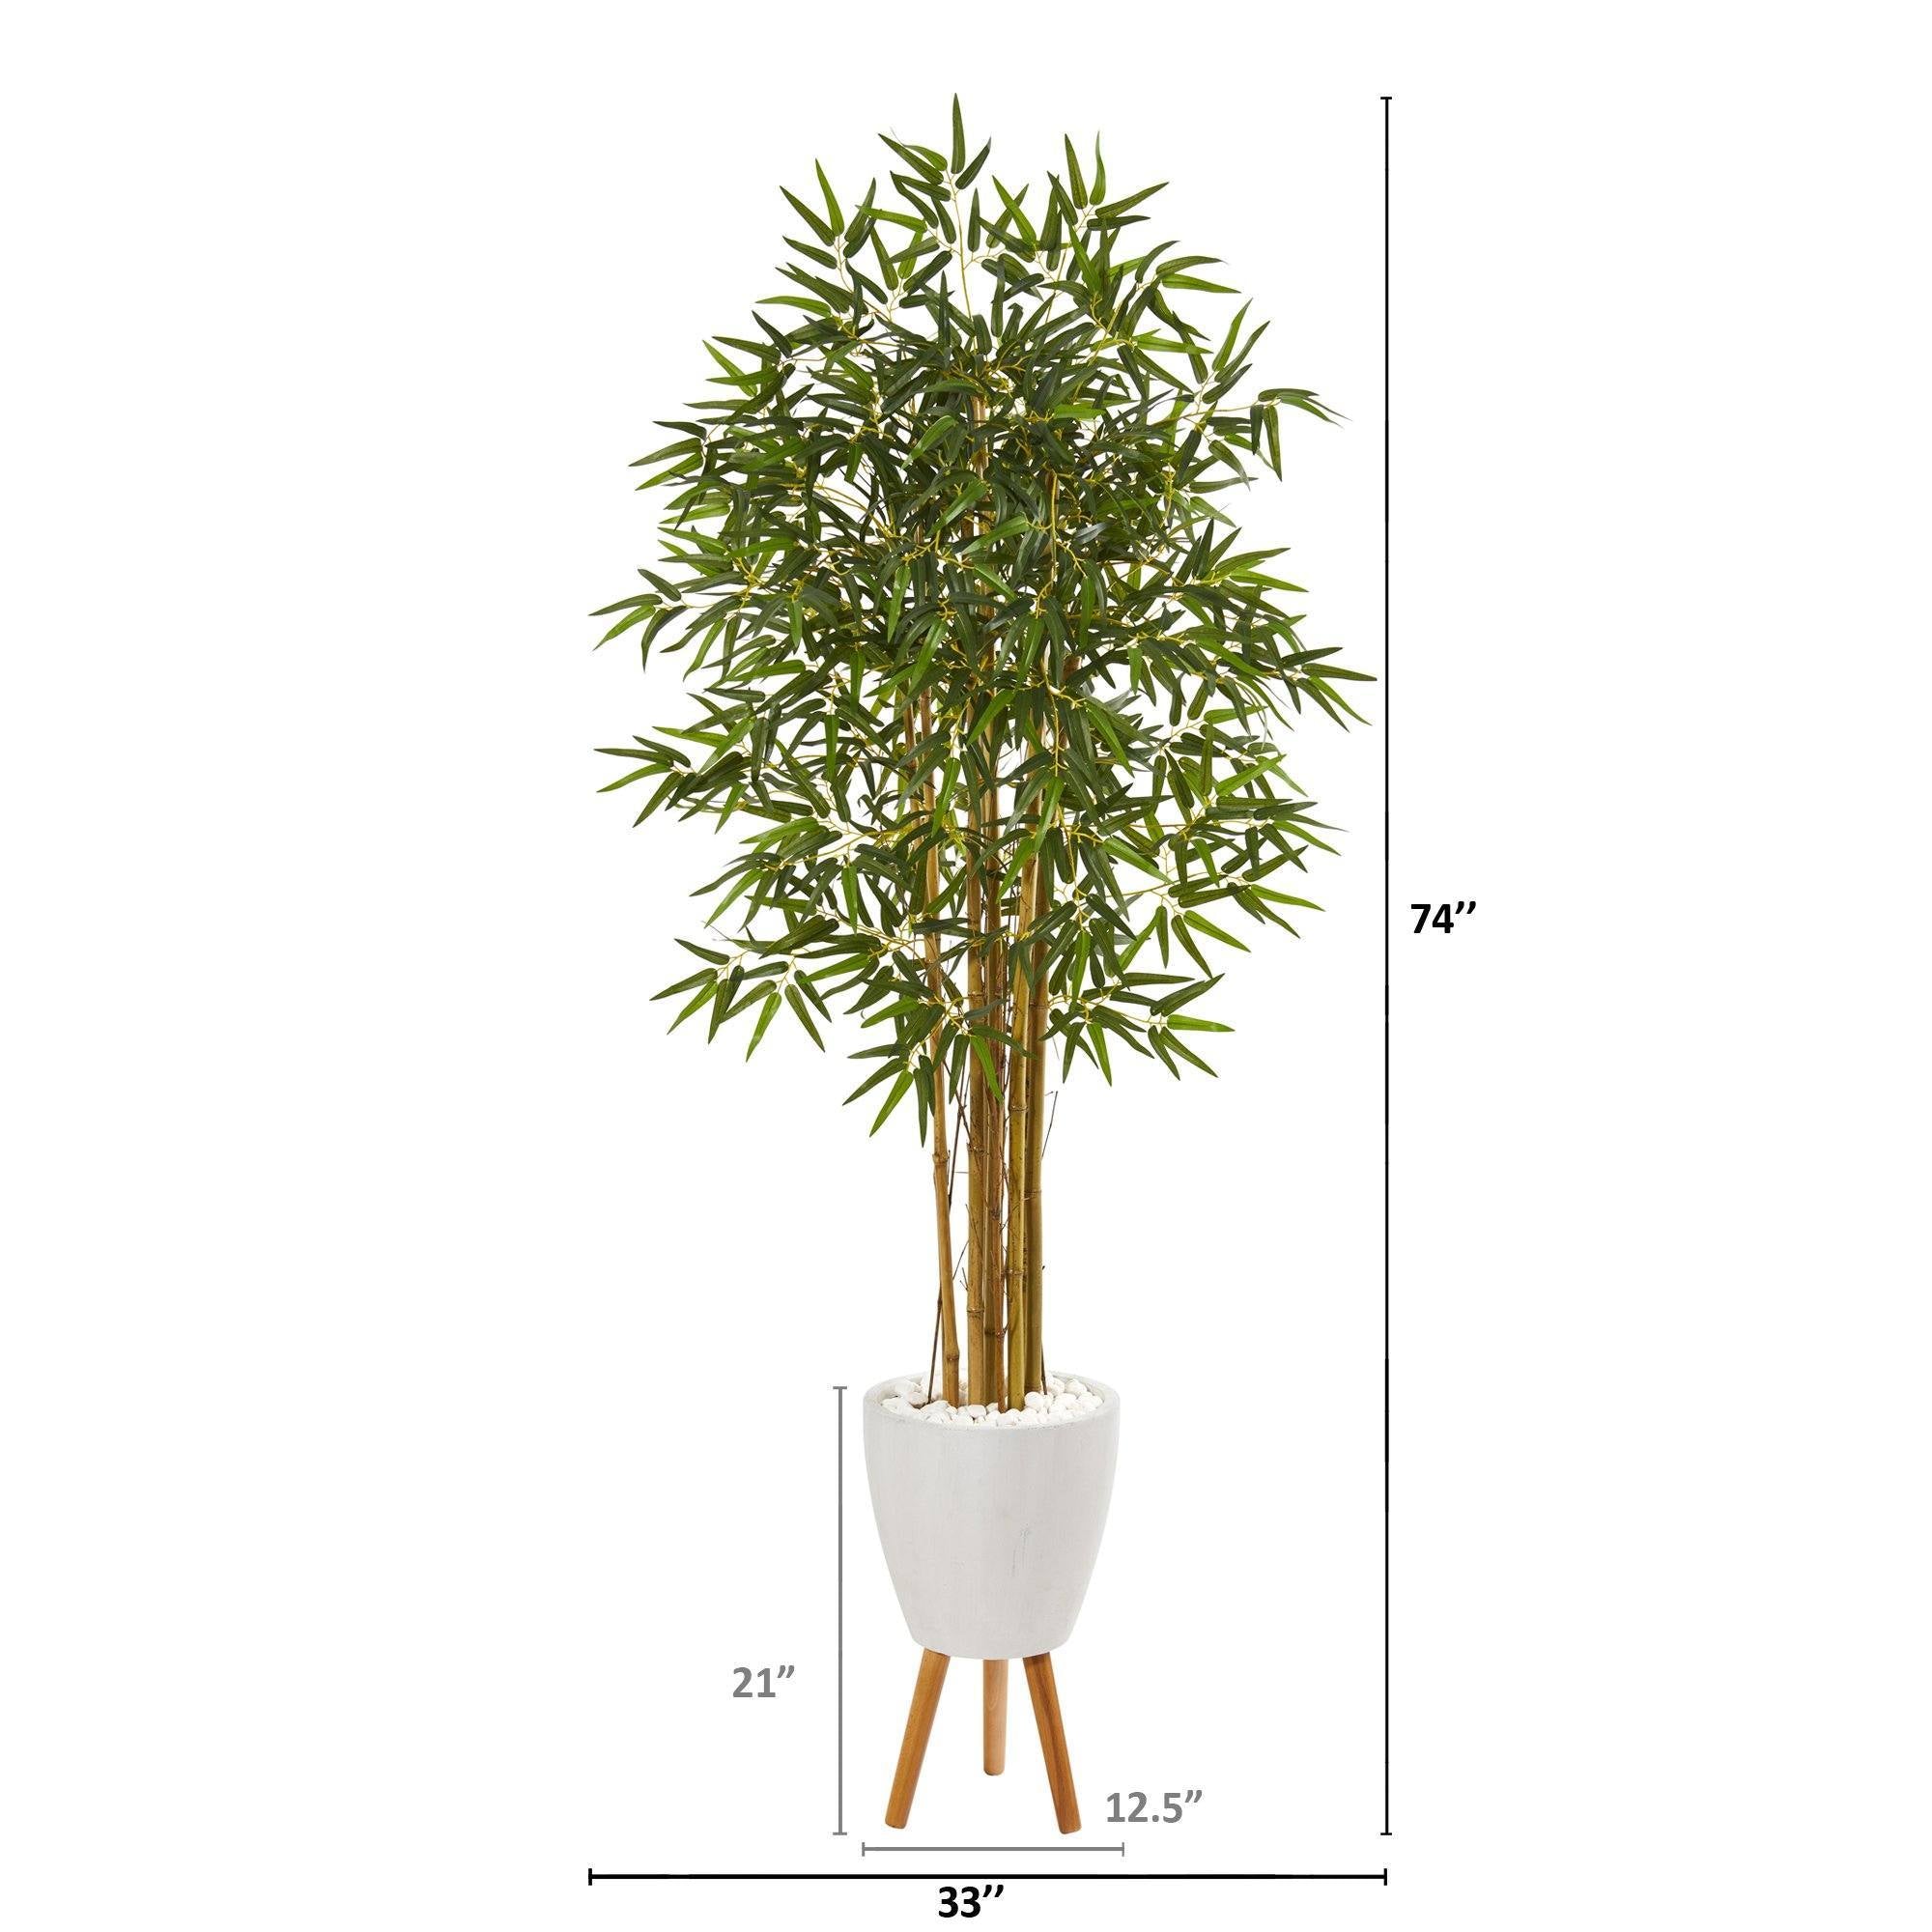 74” Multi Bambusa Bamboo Artificial Tree in White Planter with Stand ...